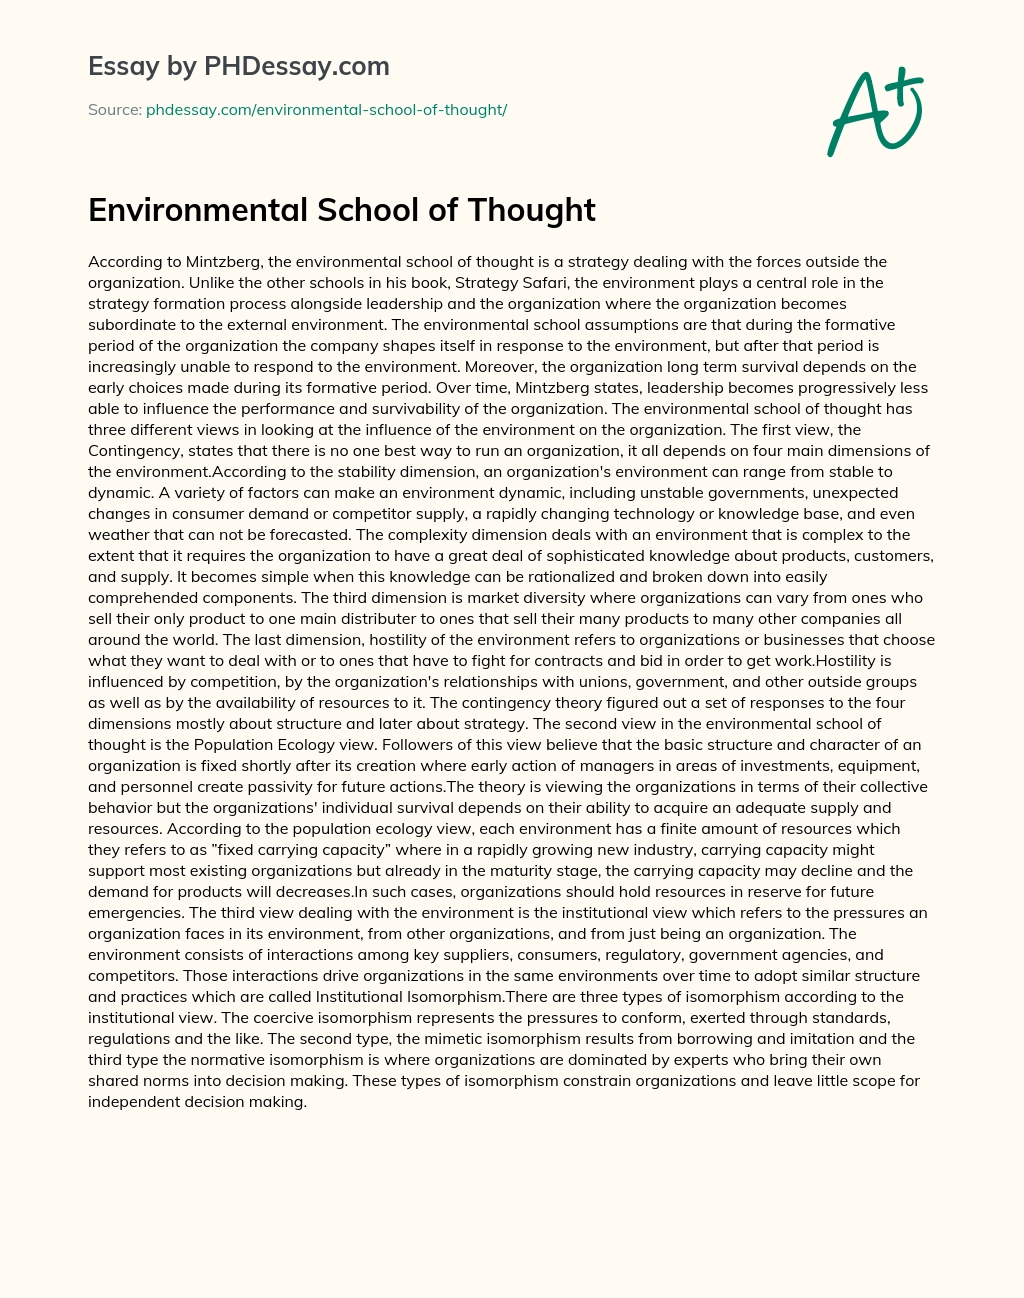 Environmental School of Thought essay